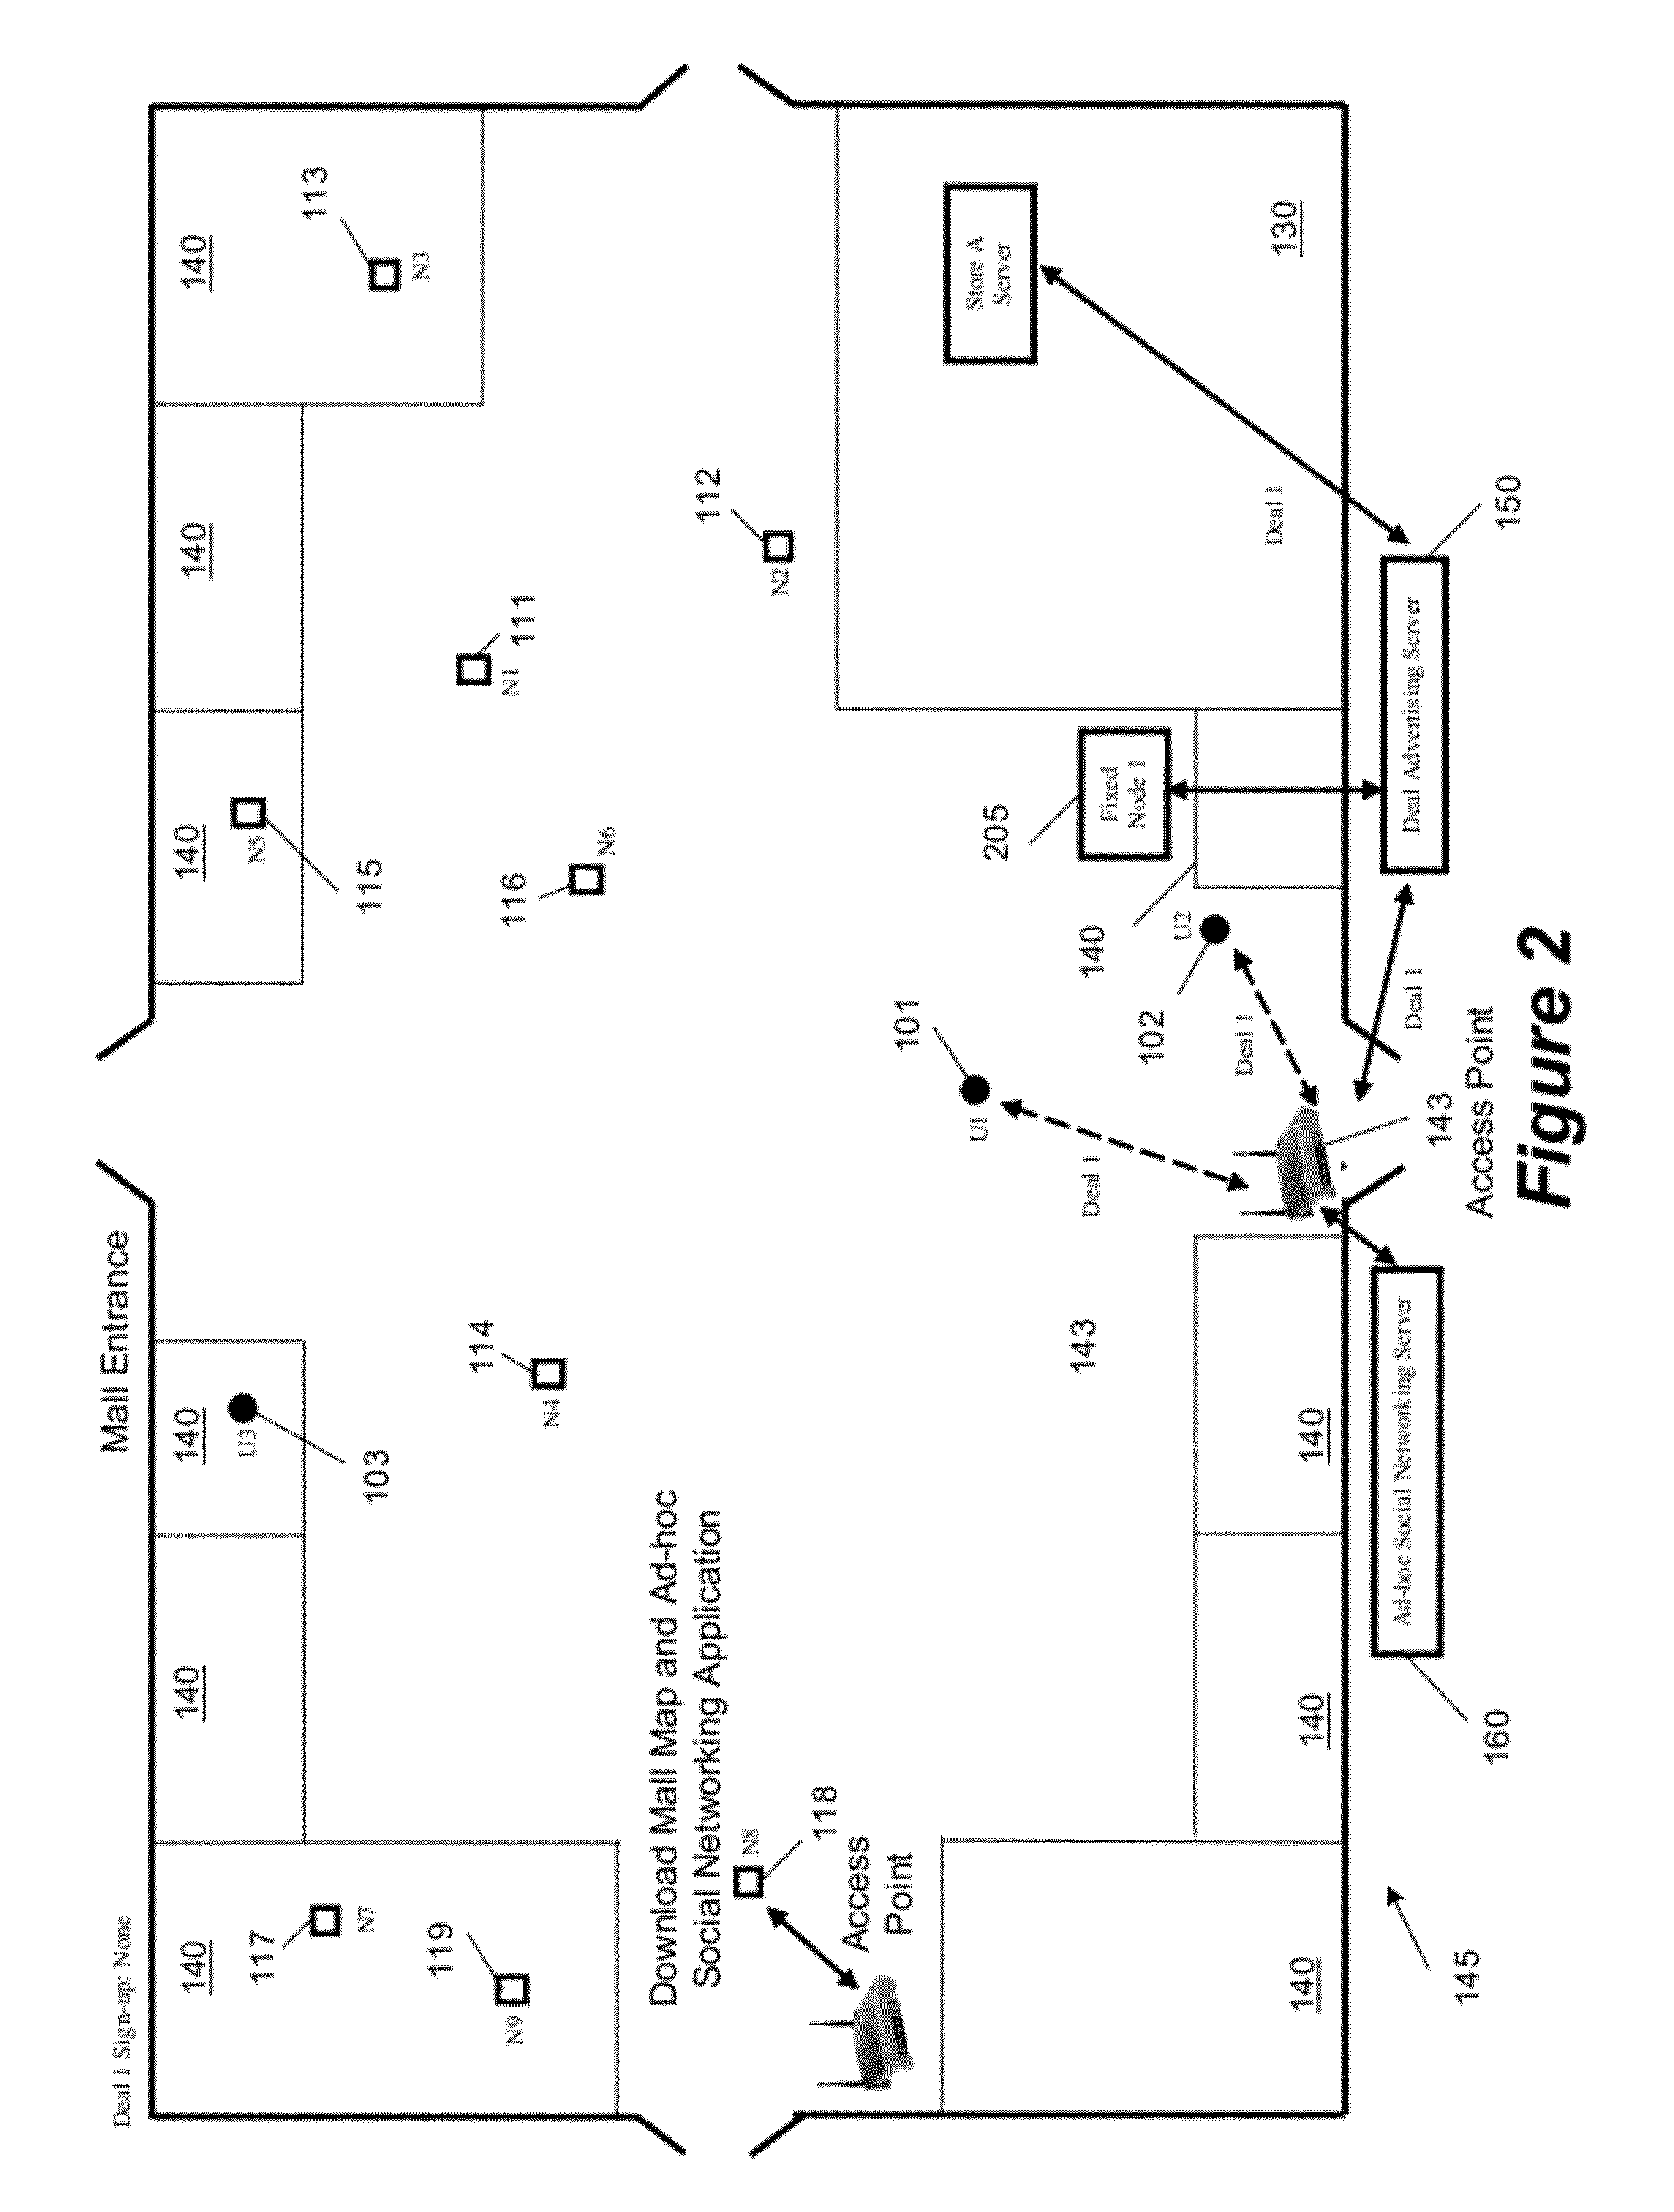 System and method for user-based discount deal formation and advertising